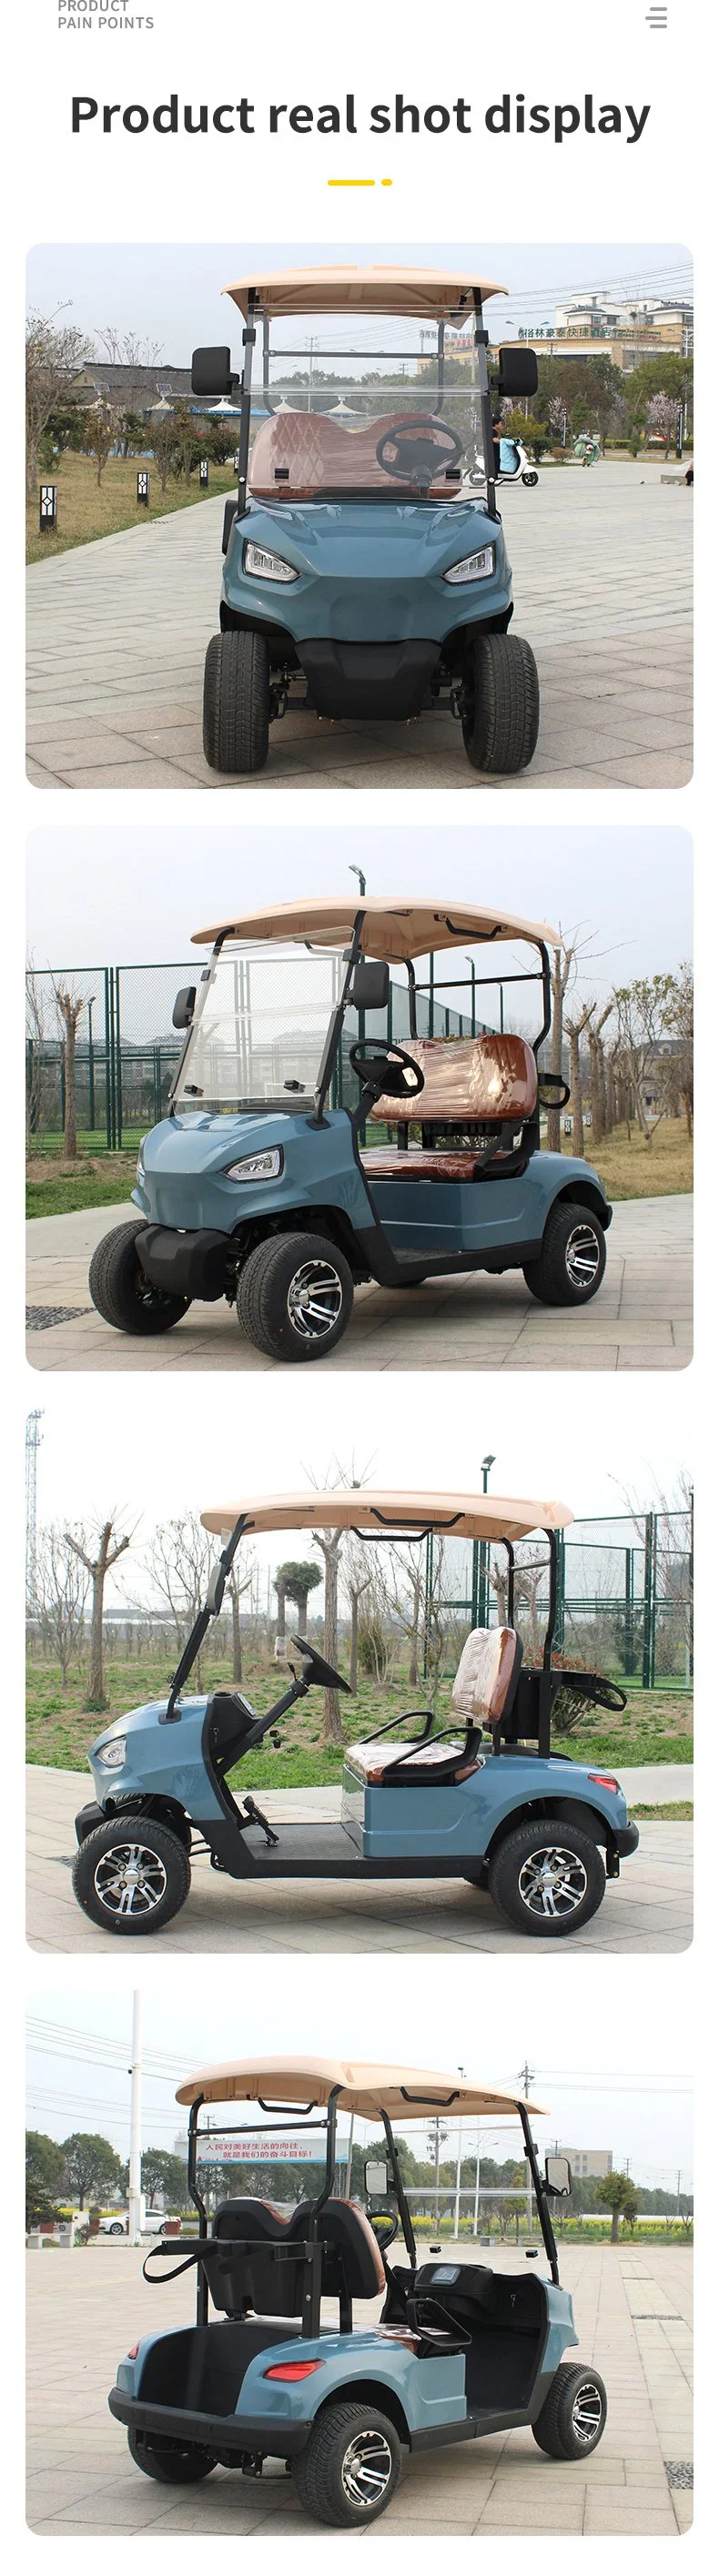 Hot Sale Fashion 2 4 6 Seaters Resort Use Utility Vehicle Hunting Golf Buggy Cart Electric Golf Carts